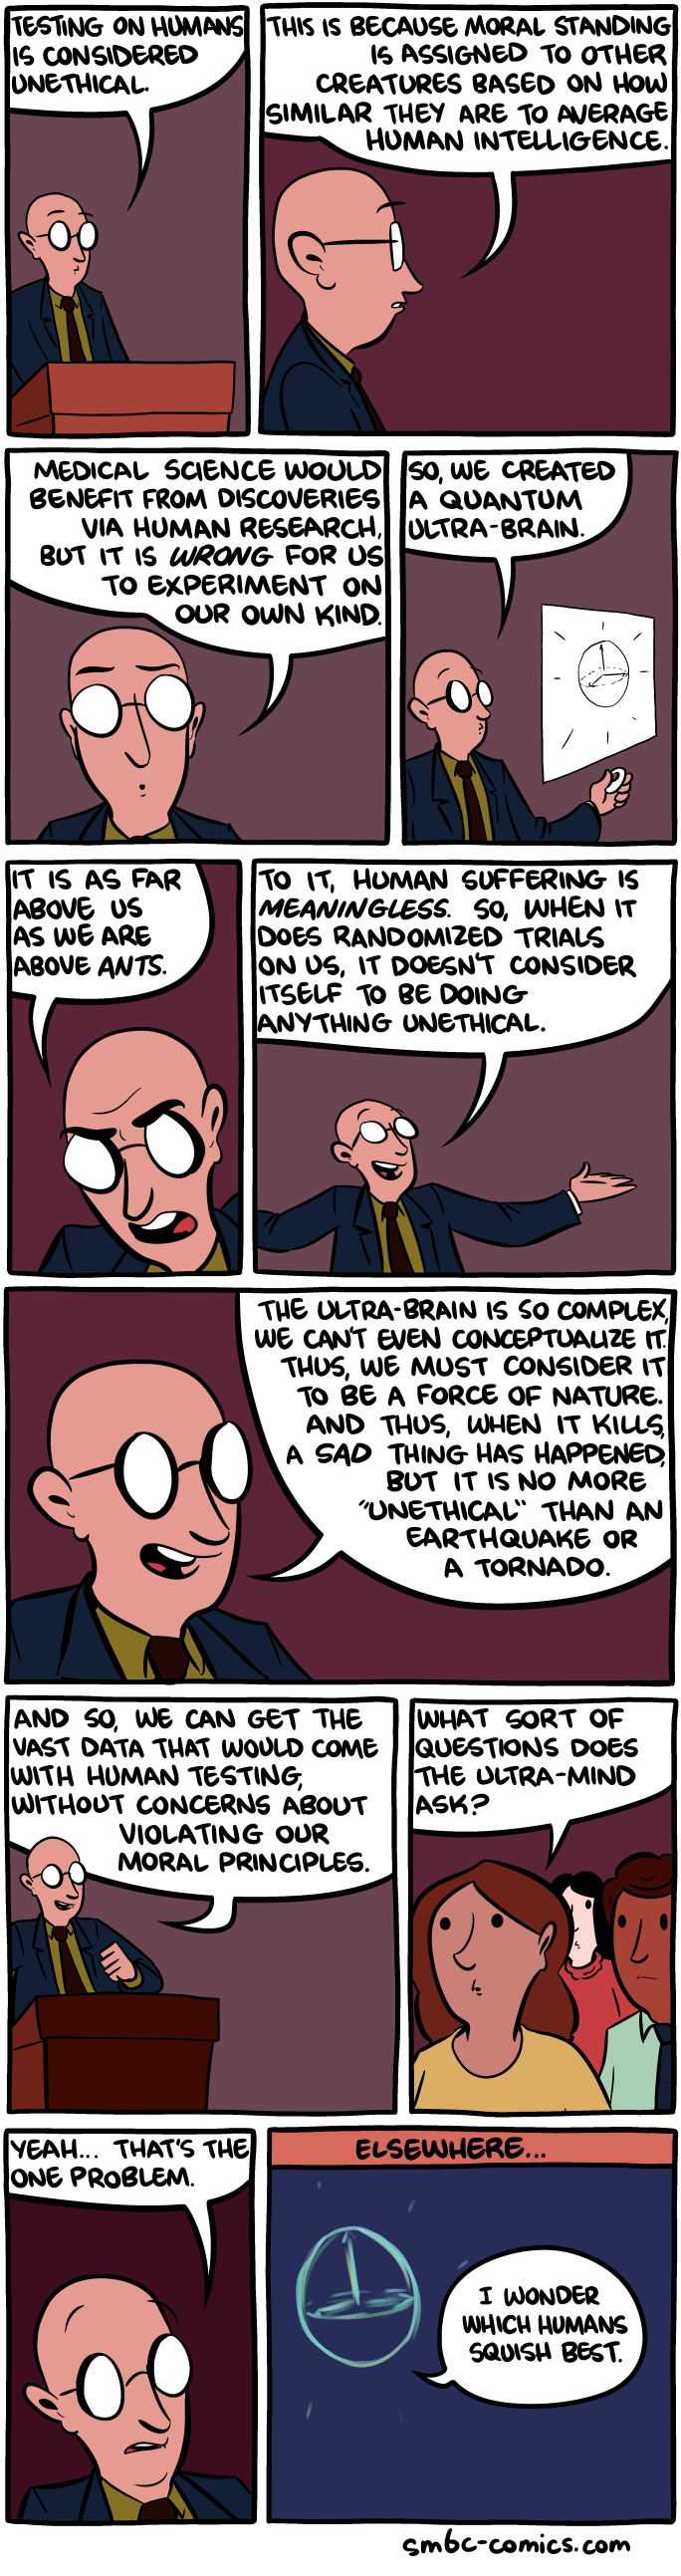 Anyone wanna teach an ethics class called And Why is *This* SMBC Wrong?